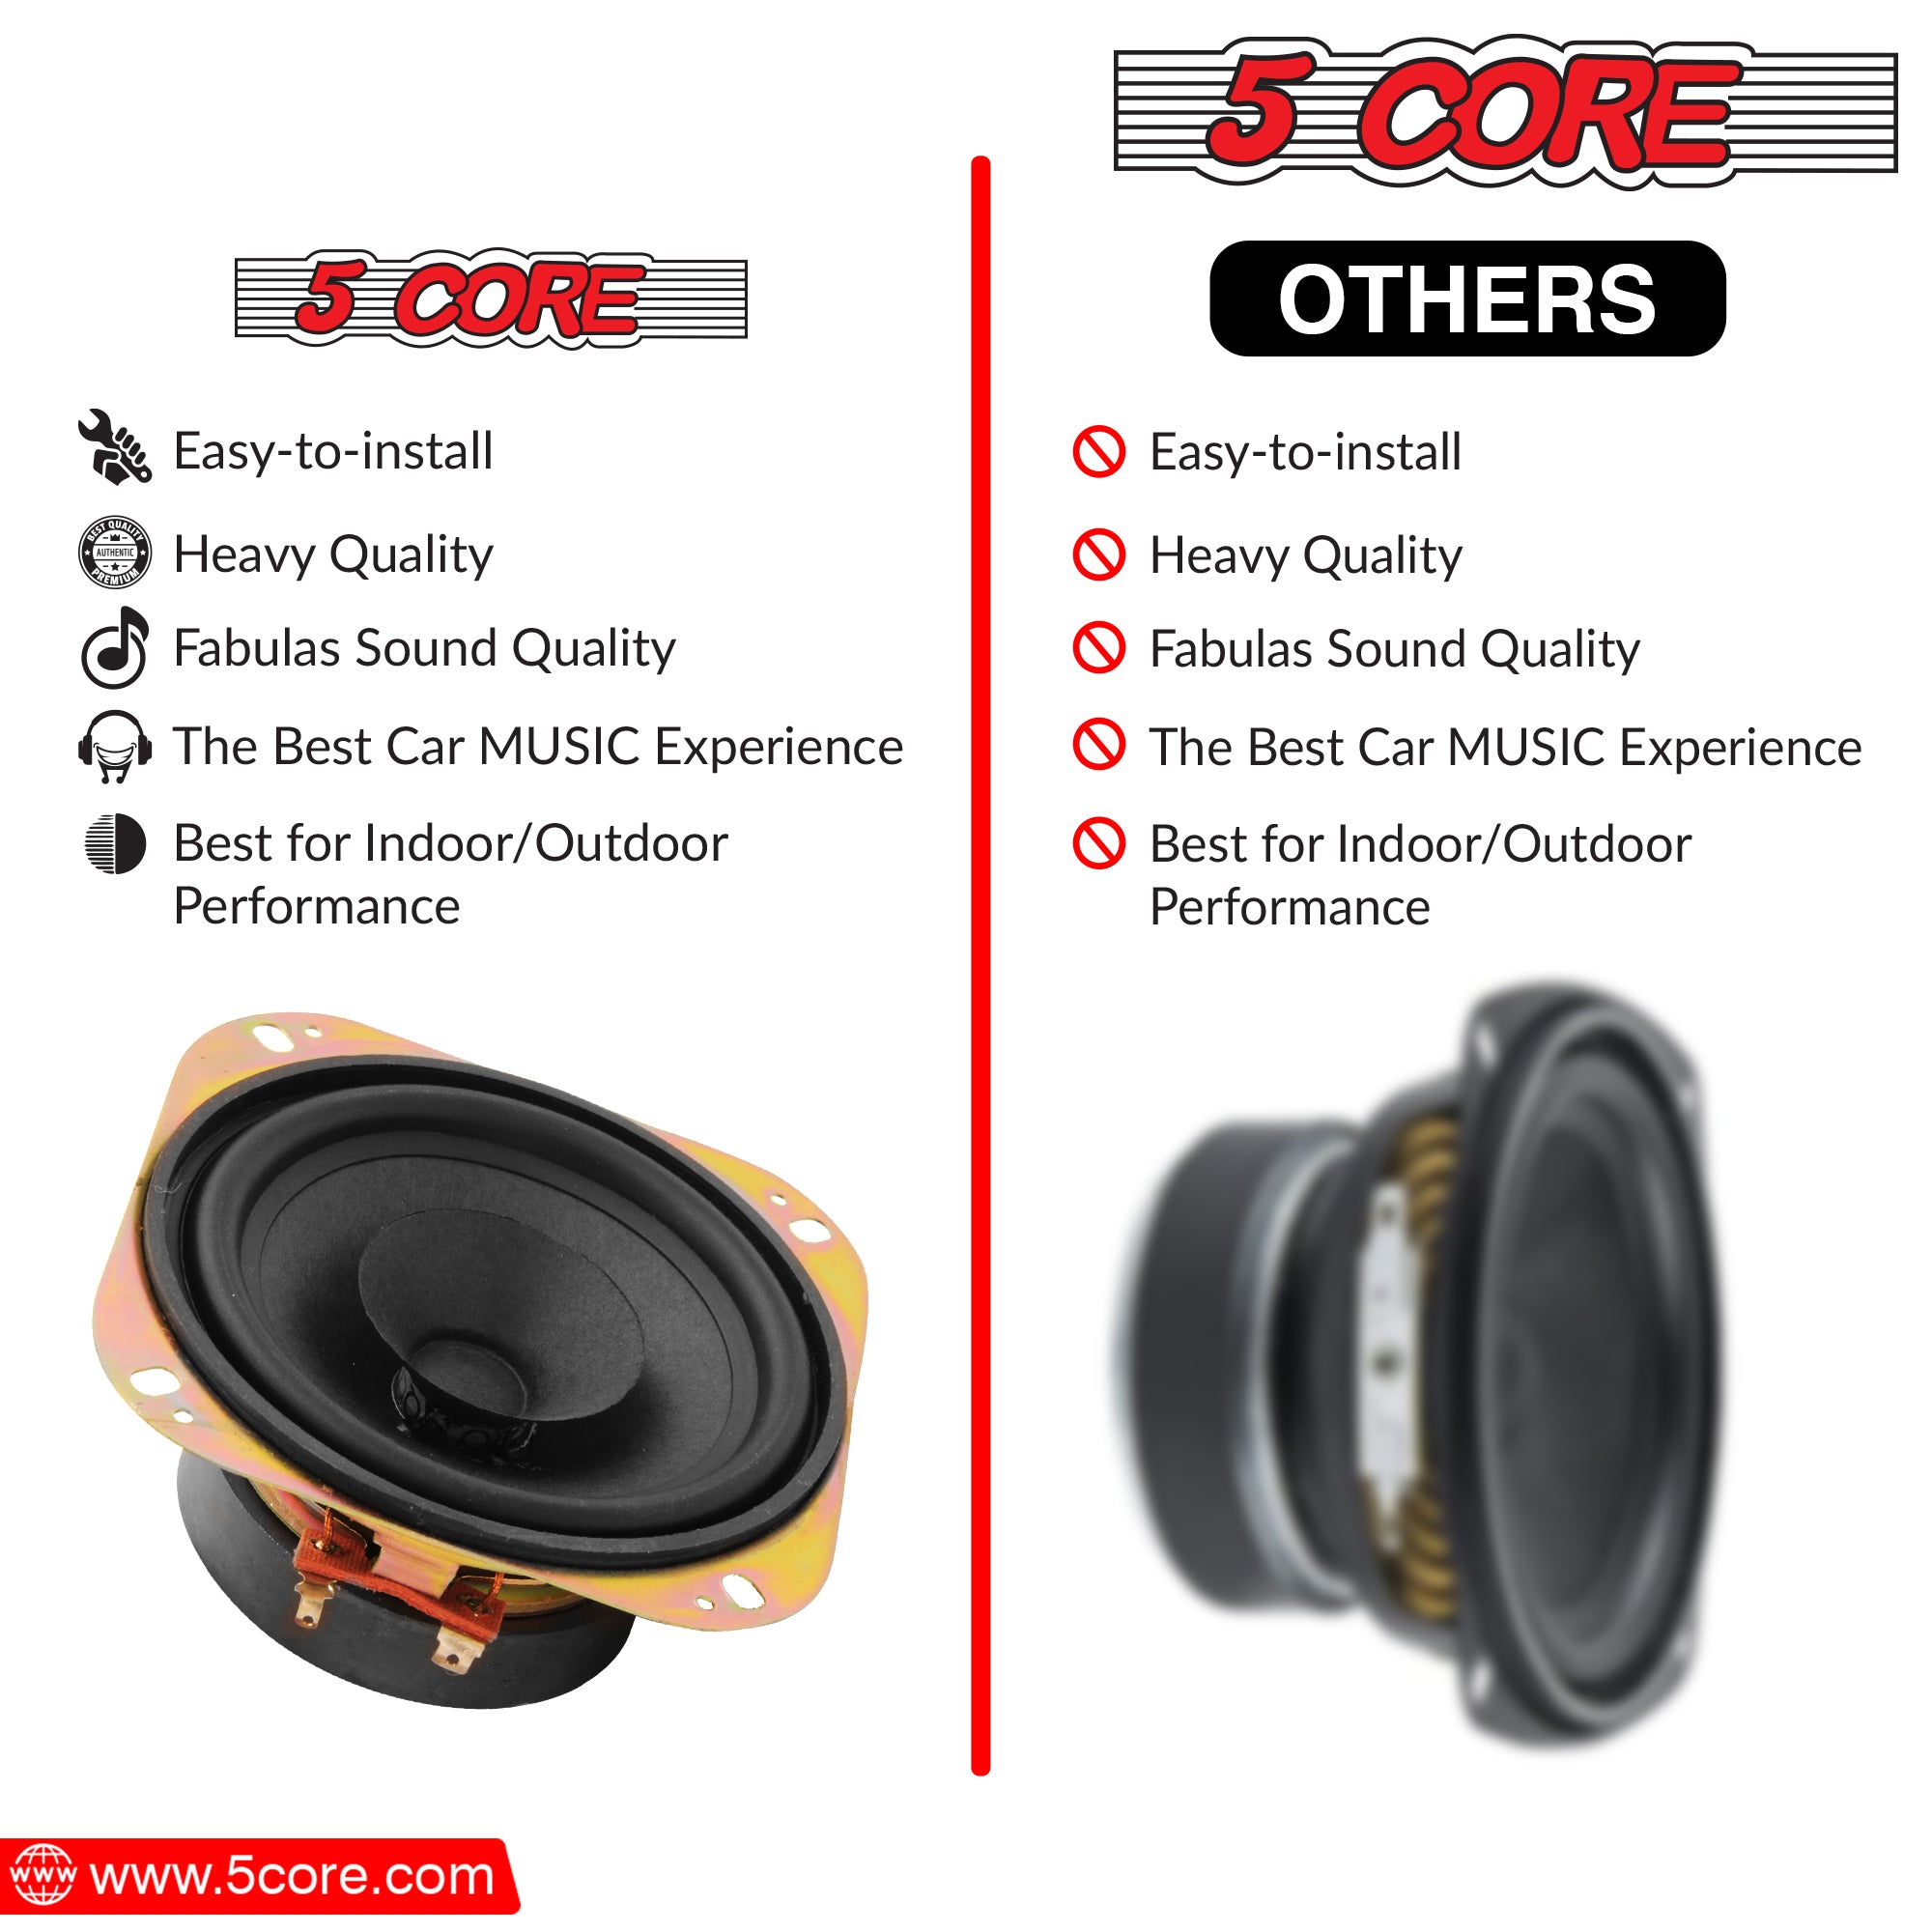 5 Core 4 Inch Subwoofer 2 Pack • 200W Peak 4 Ohm Replacement Car Bass Sub Woofer w 0.81" Voice Coil